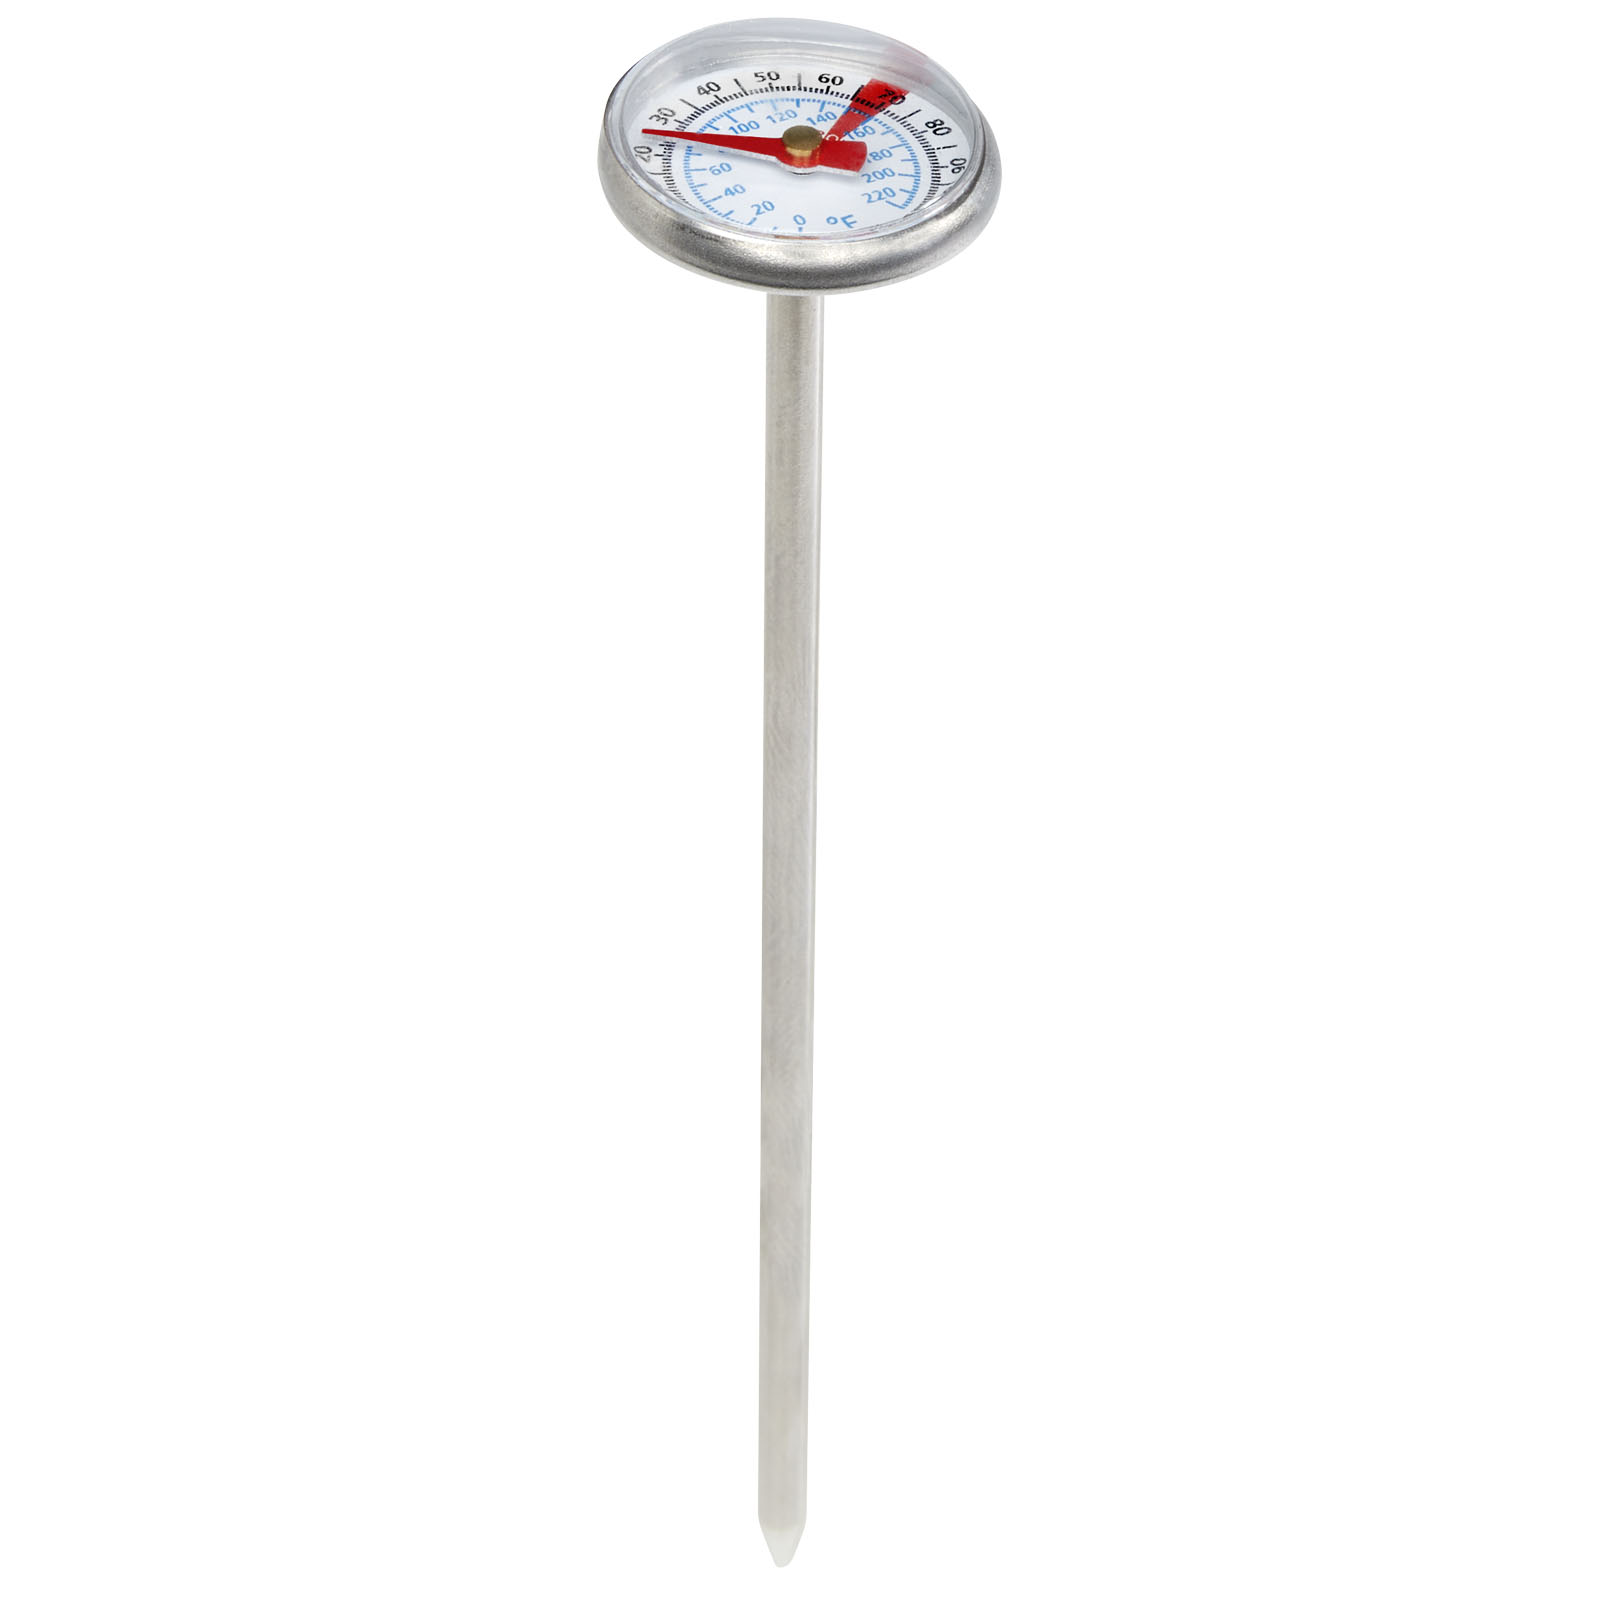 Advertising BBQ Accessories - Met BBQ thermomether